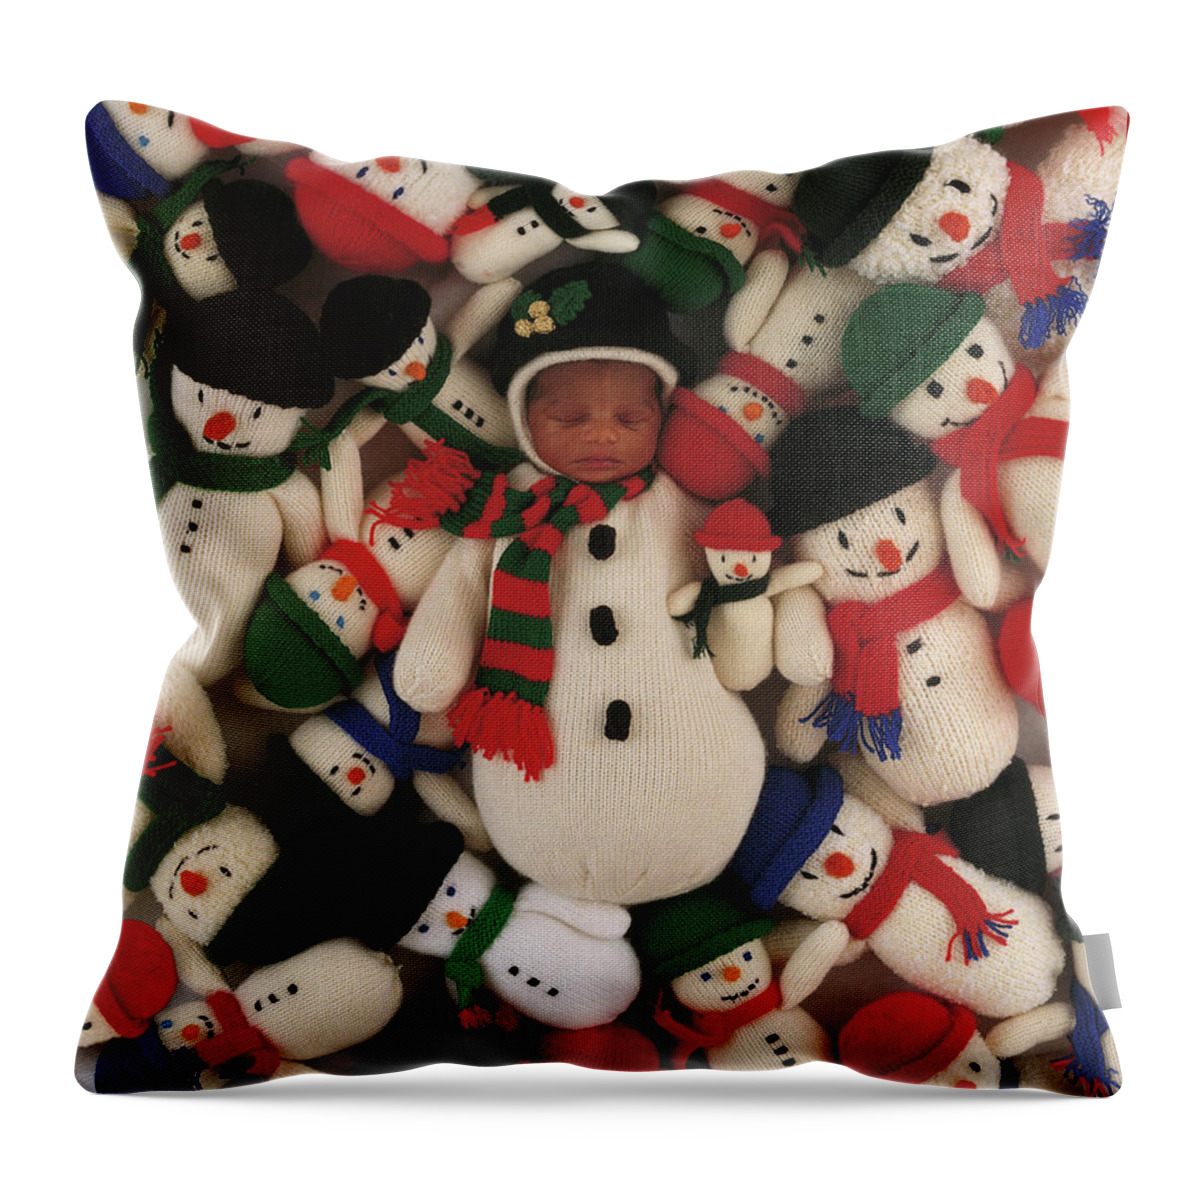 Holiday Throw Pillow featuring the photograph Knitted Snowman by Anne Geddes